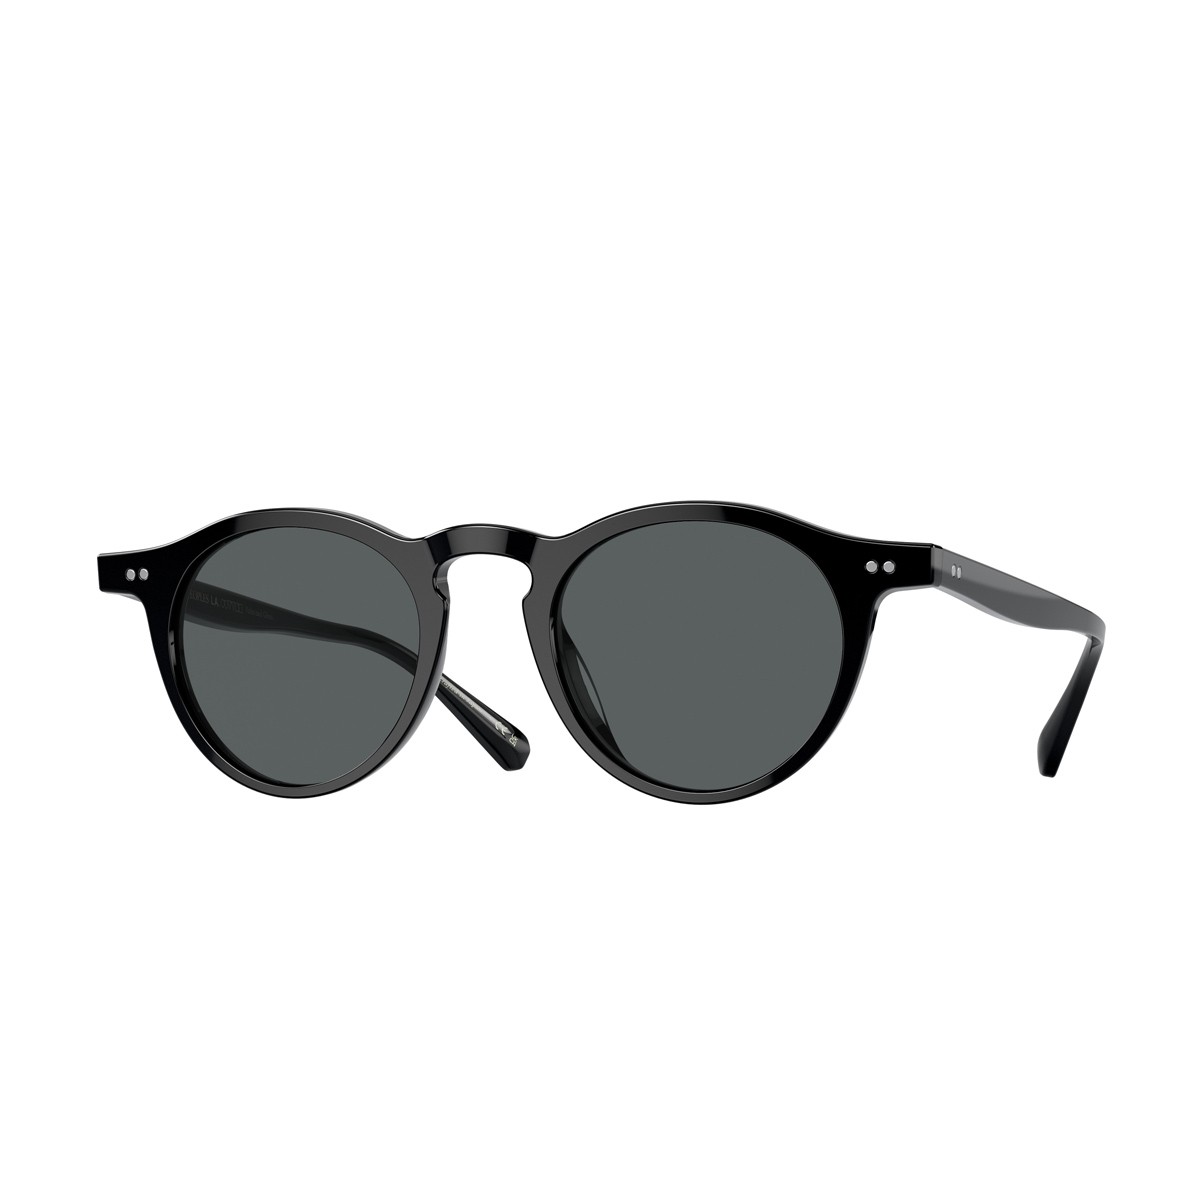 OLIVER PEOPLES Sixties square-frame acetate sunglasses | NET-A-PORTER-mncb.edu.vn